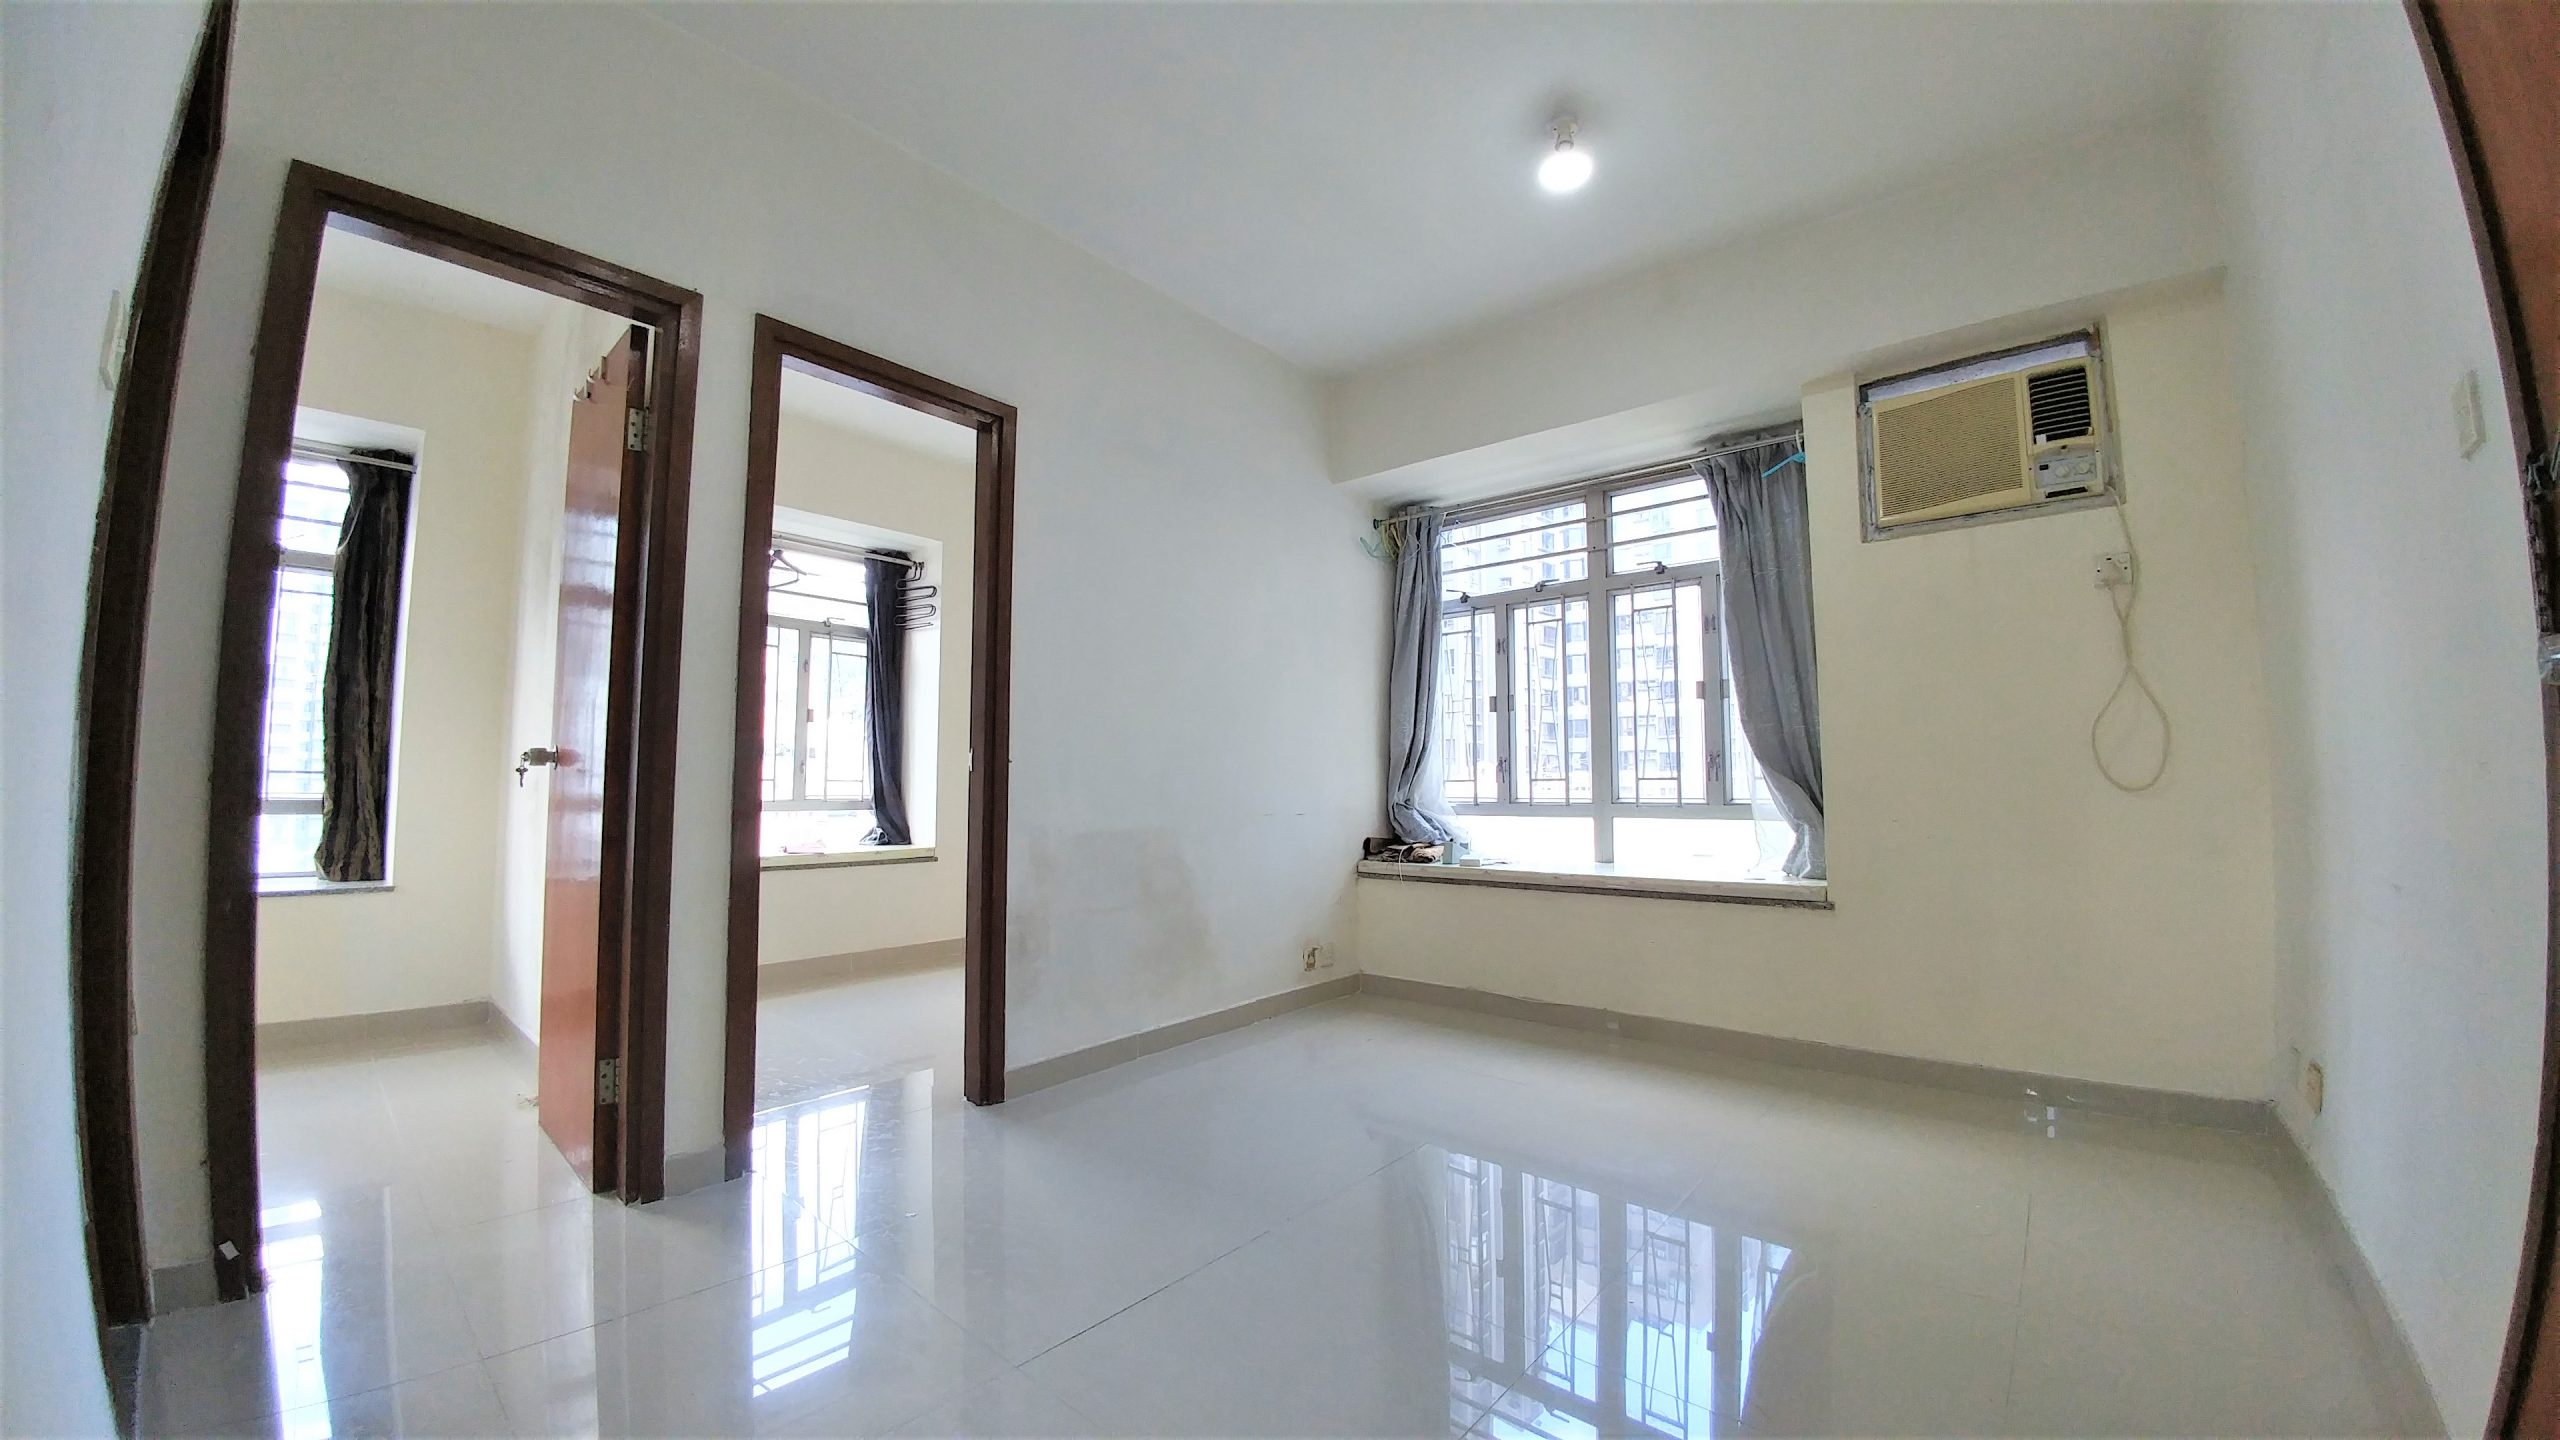 Hoi Sing Building – Decent renovation with 2 bedrooms